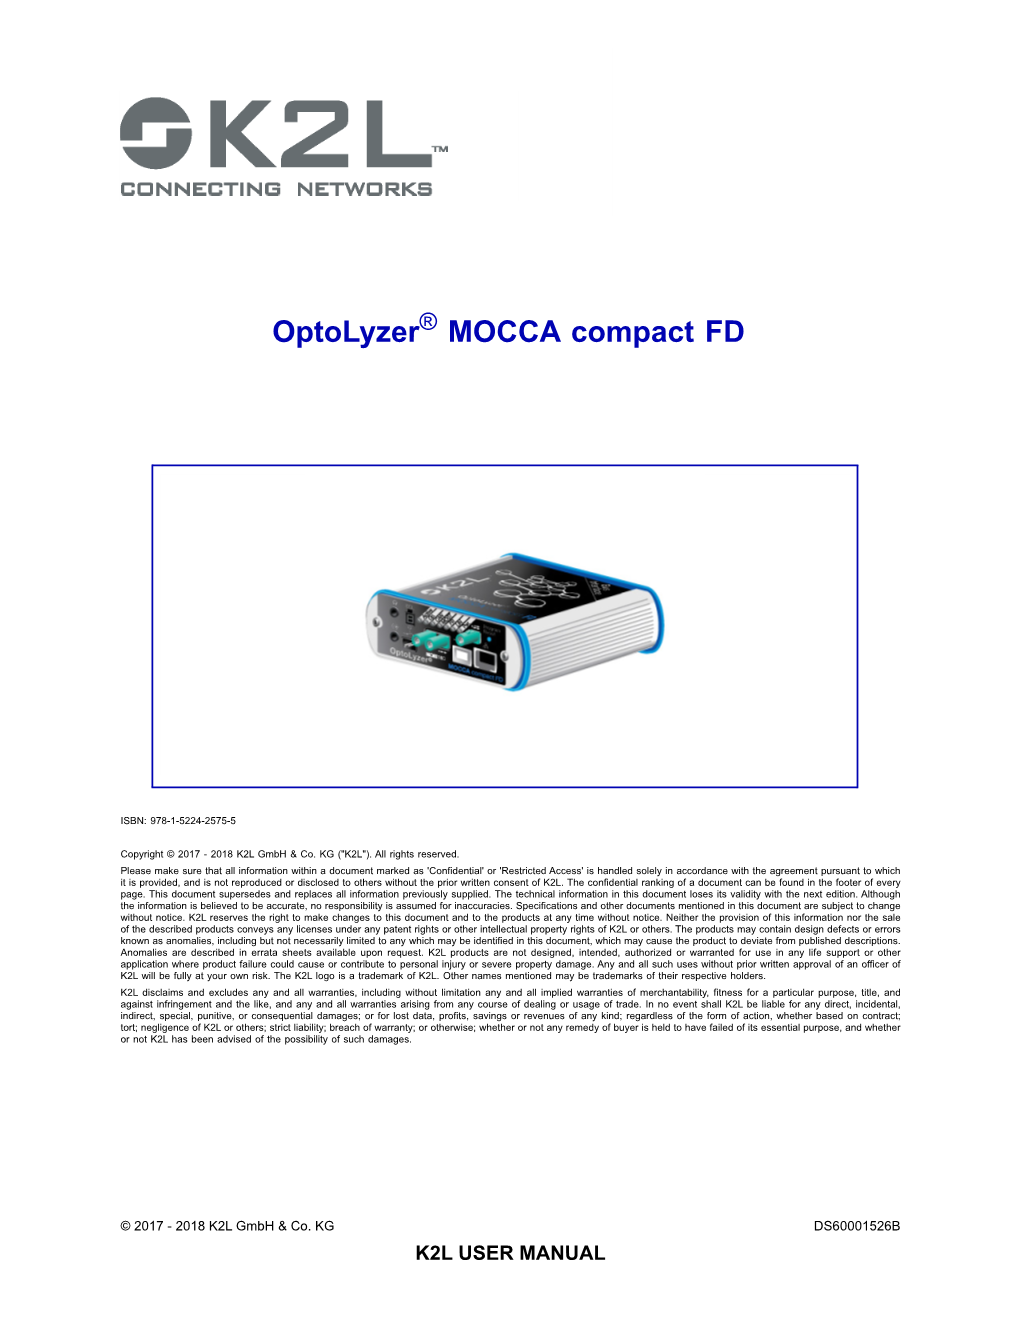 Optolyzer® MOCCA Compact FD User's Guide